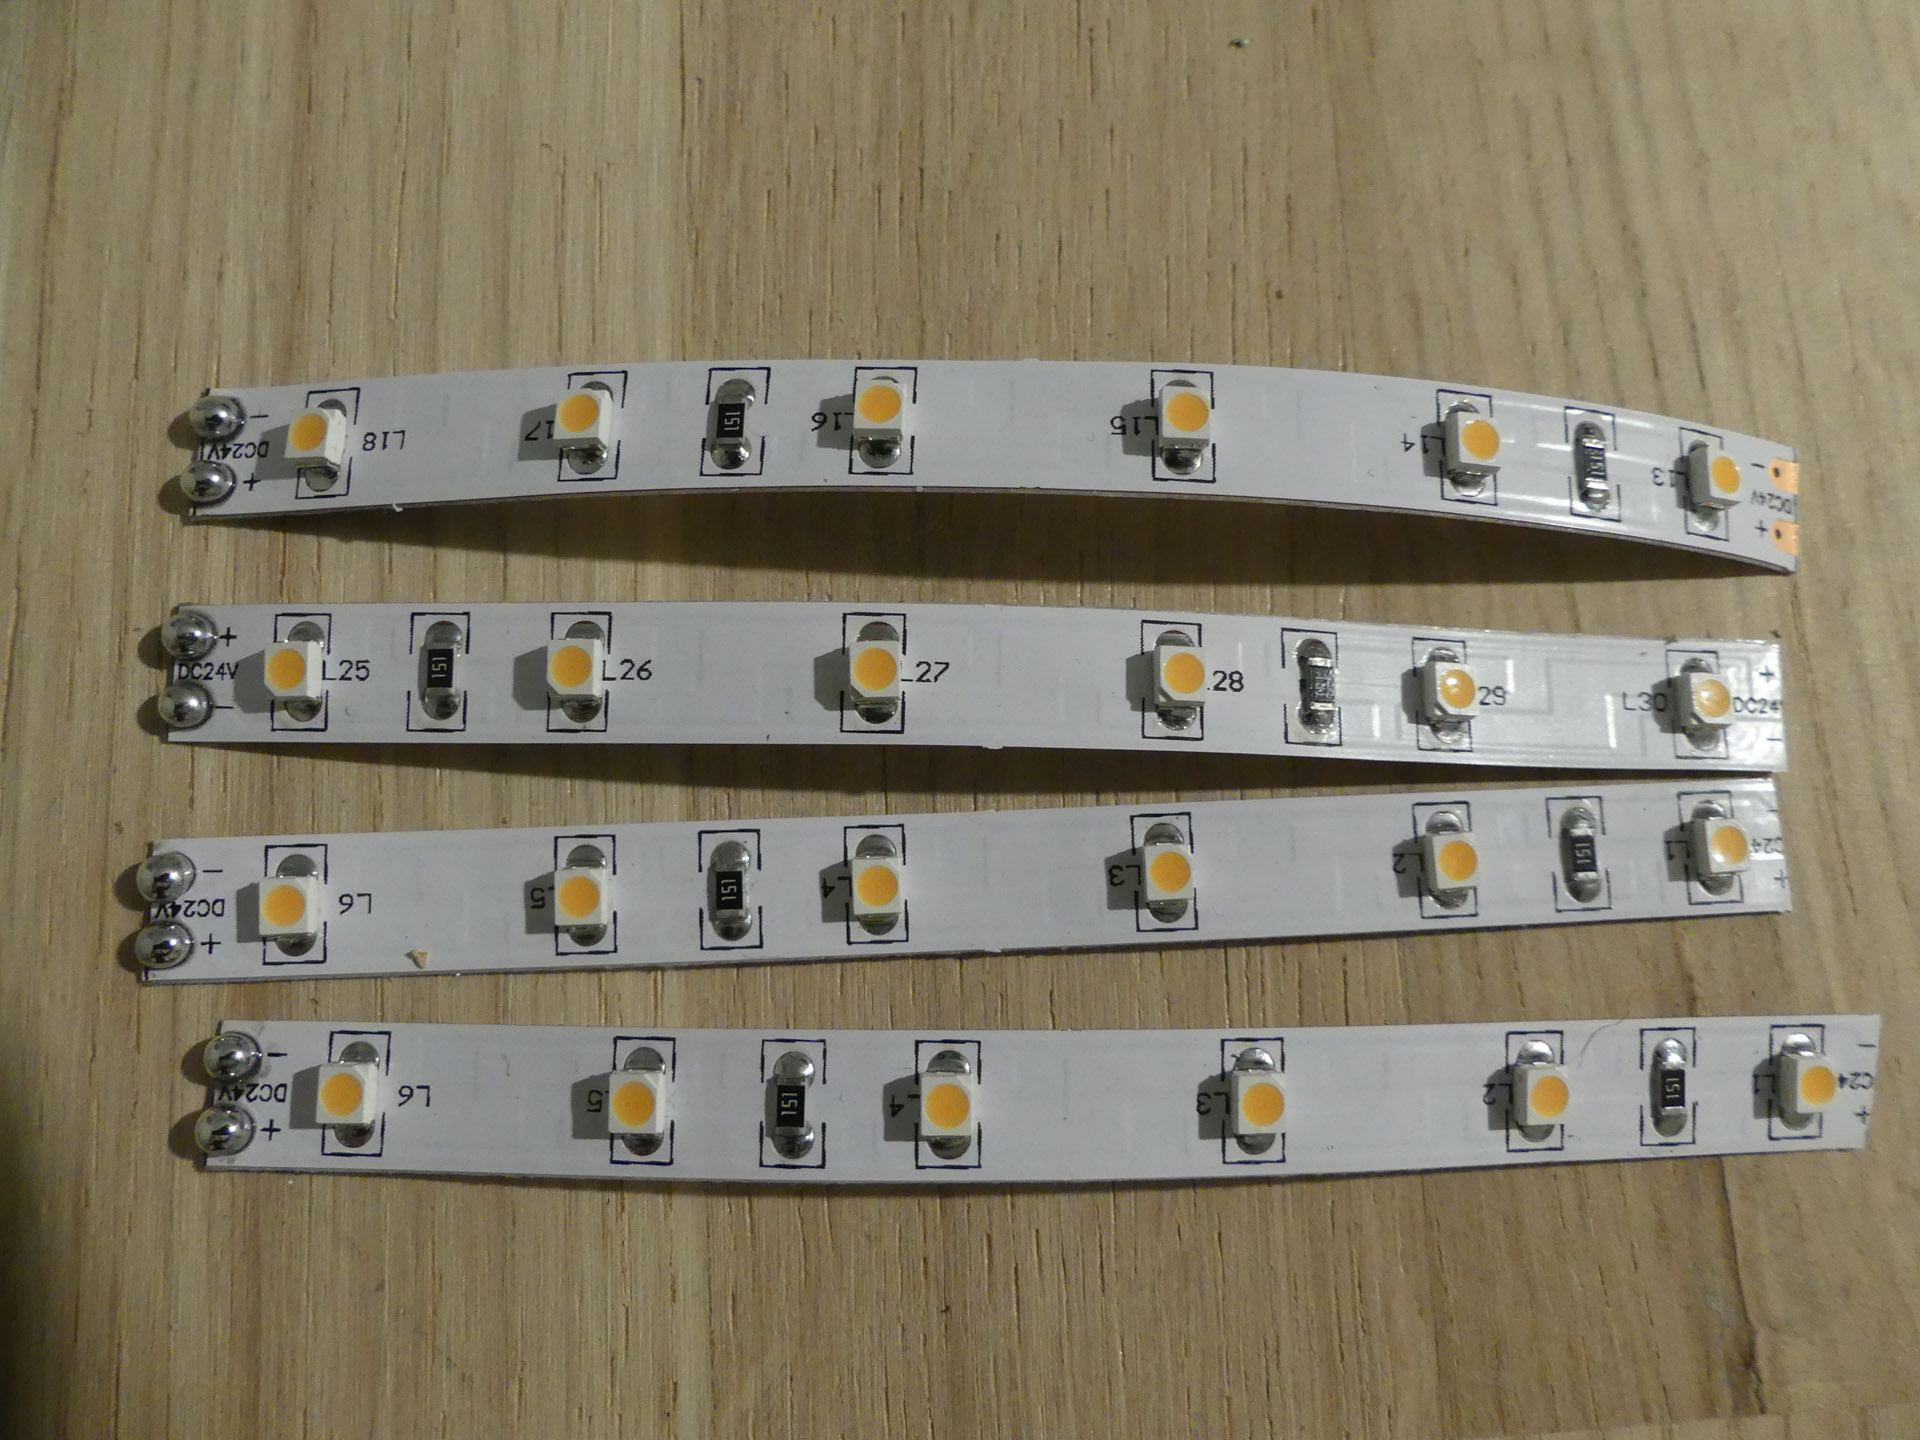 Step 4 – Installing LED lighting – The Project